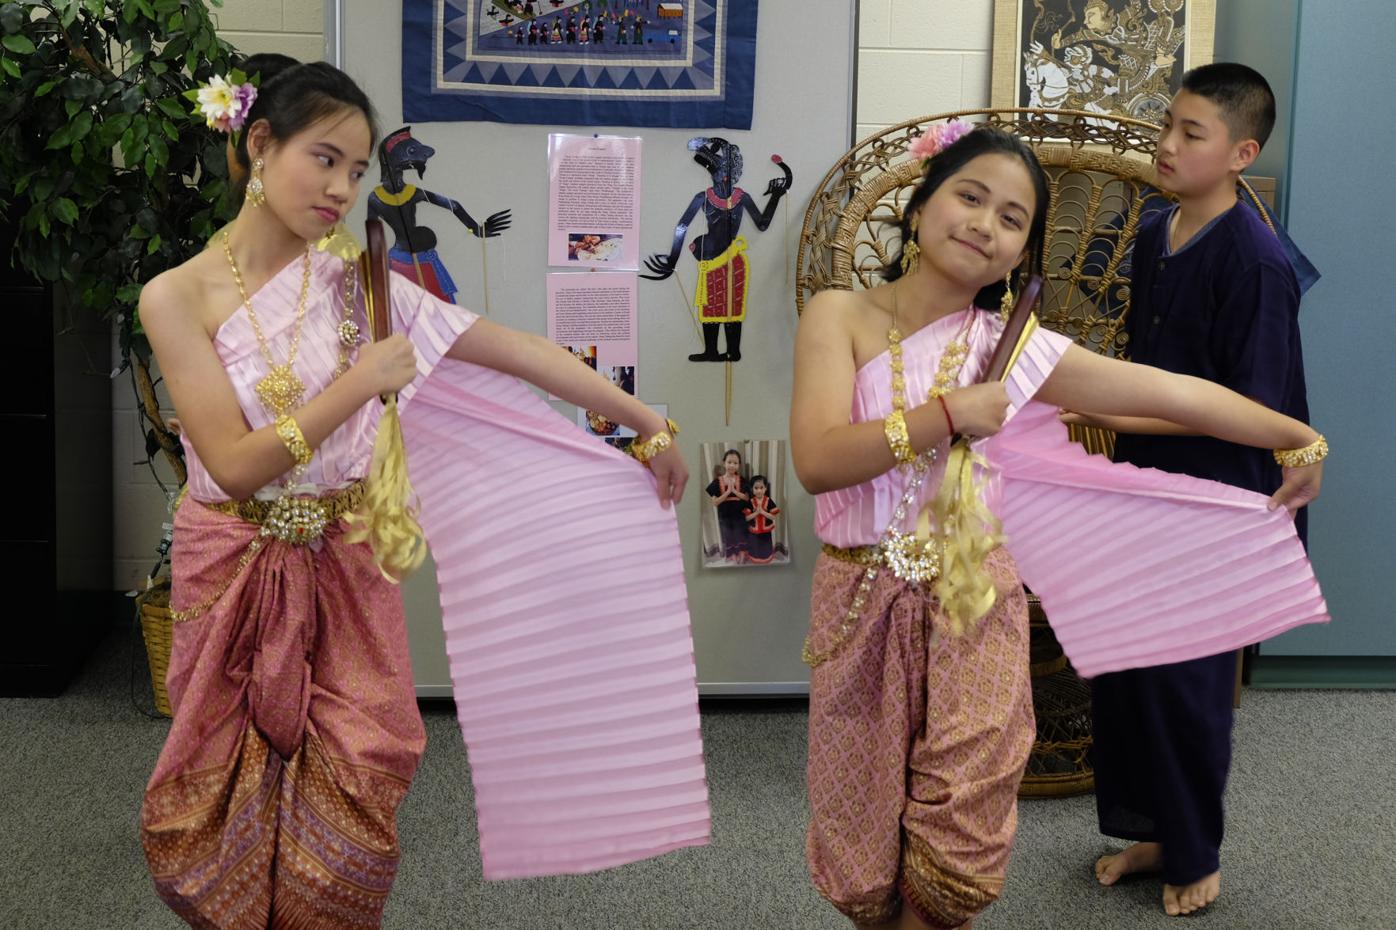 Thai exchange students share their culture | Community | hngnews.com Traditional Thai Dancing